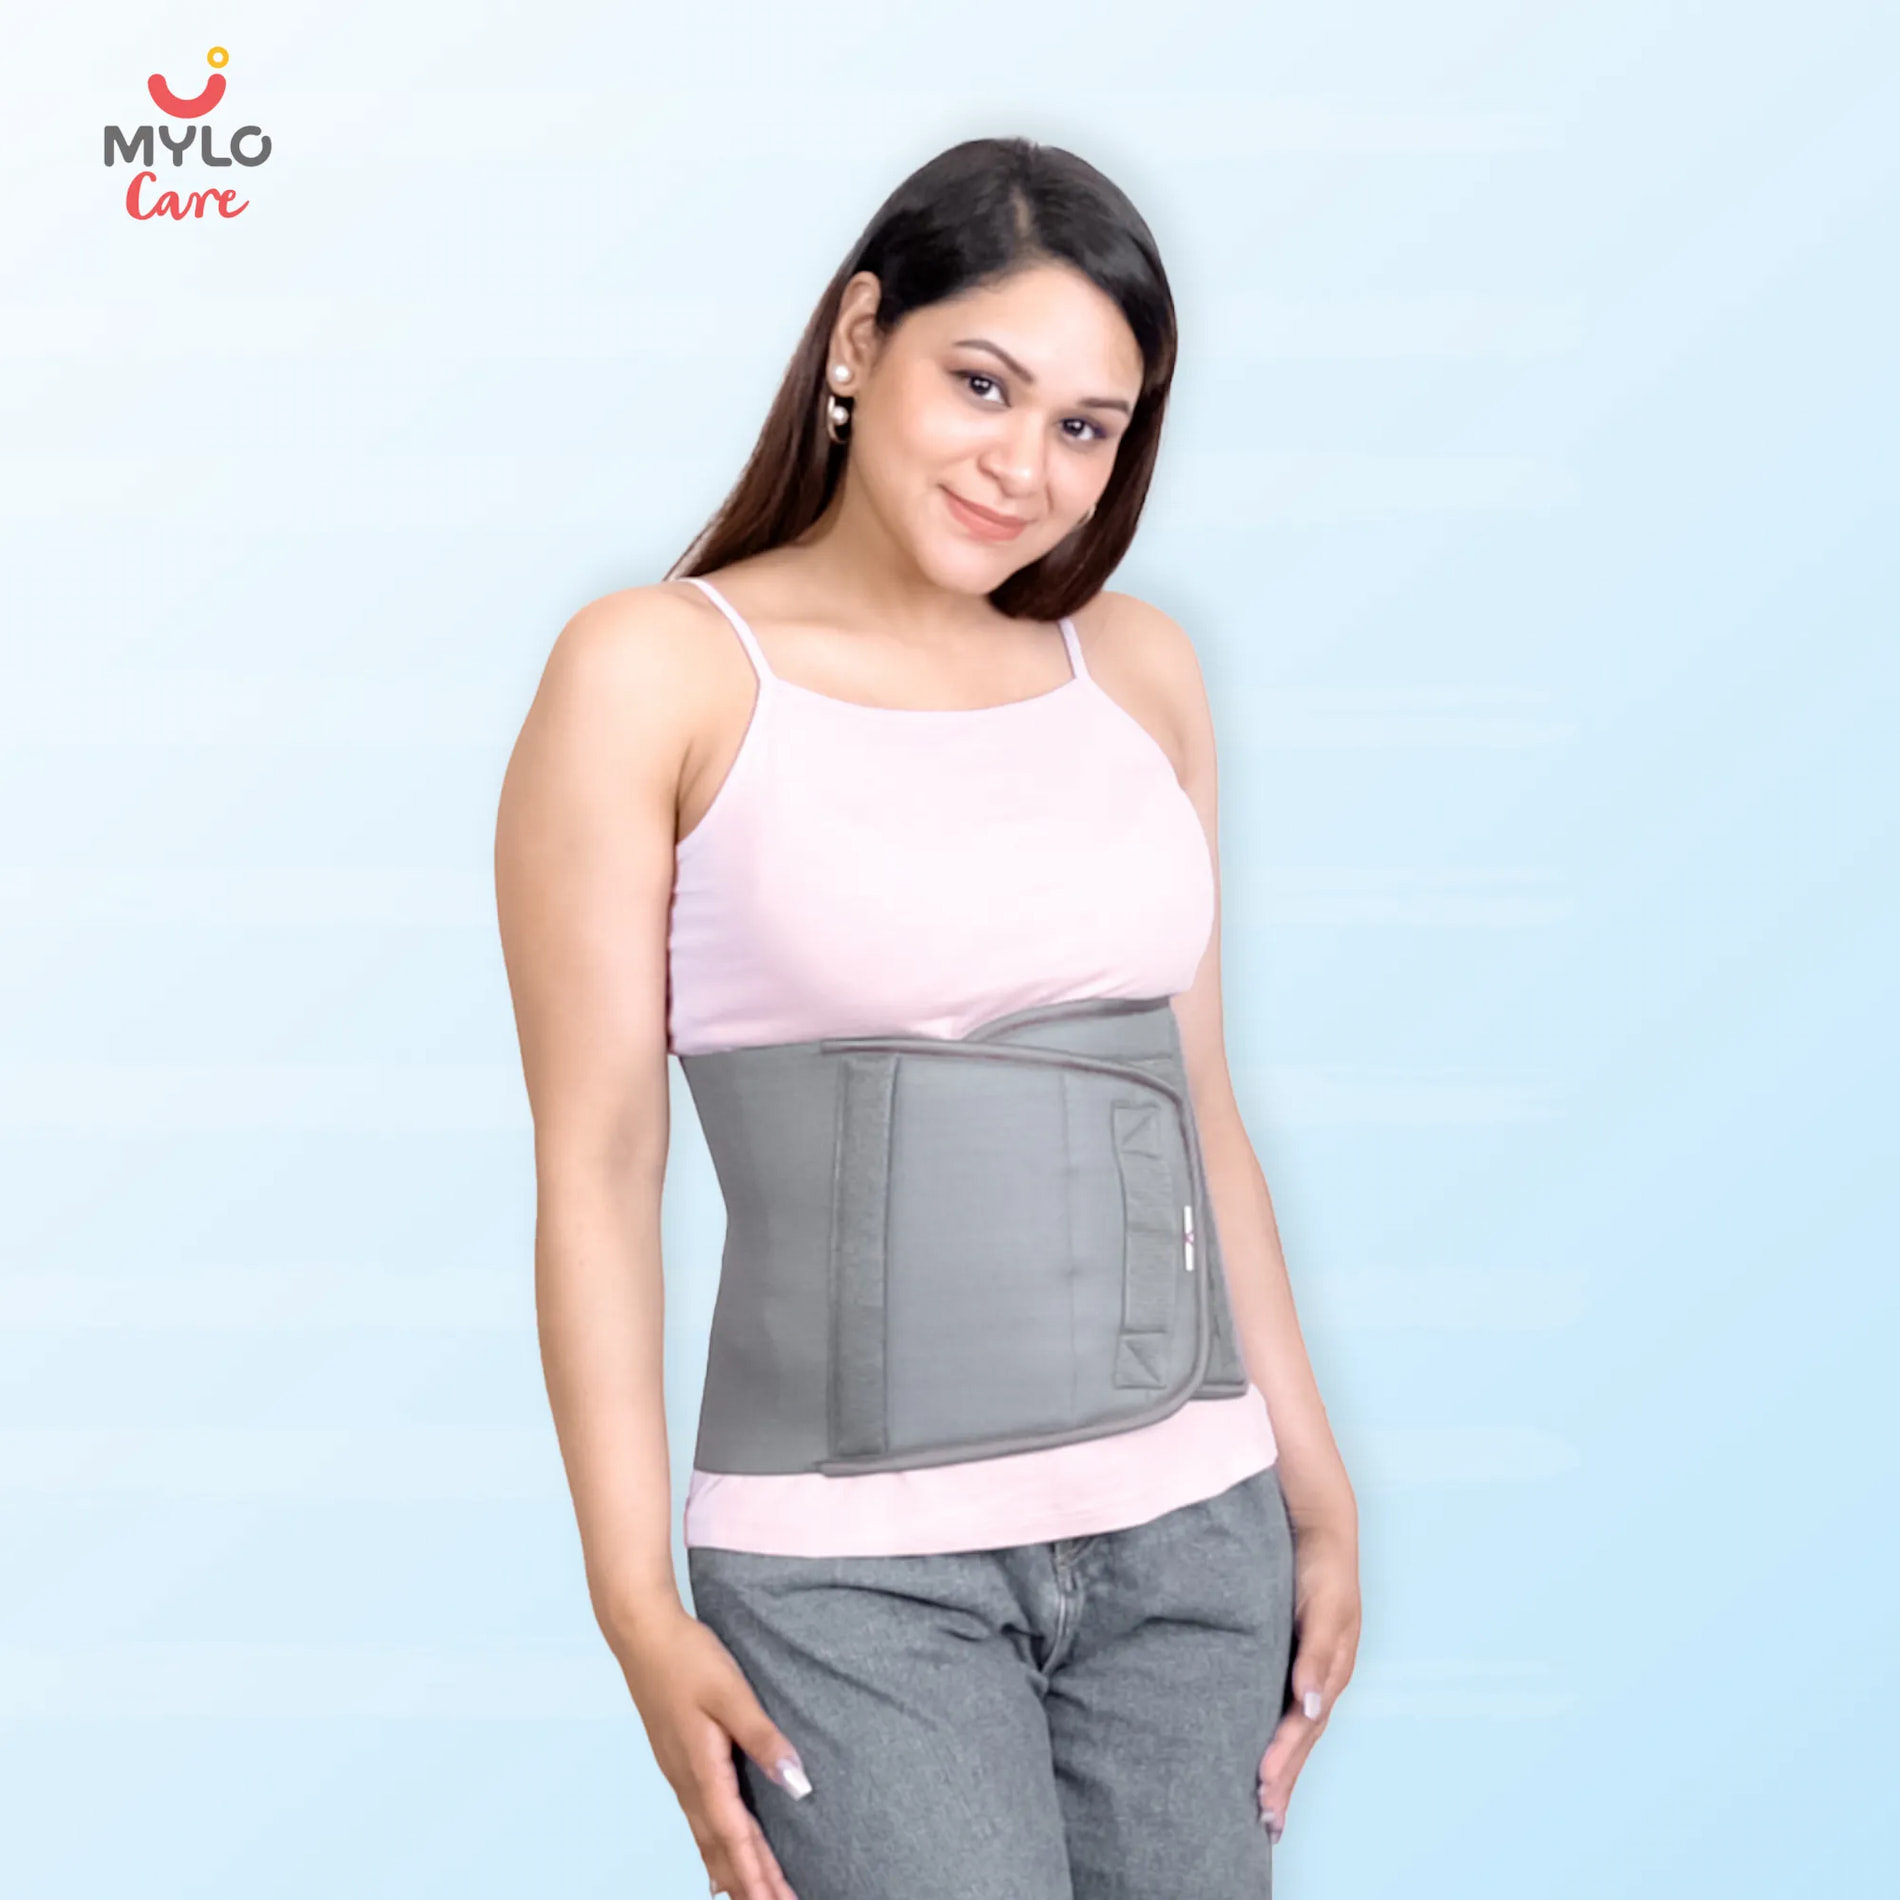 Post Pregnancy Belt After Delivery | Tightens Tummy | Improves Posture | Provides Back Support | Belly fat Loss Belt | Comfortable & Lightweight - XXL